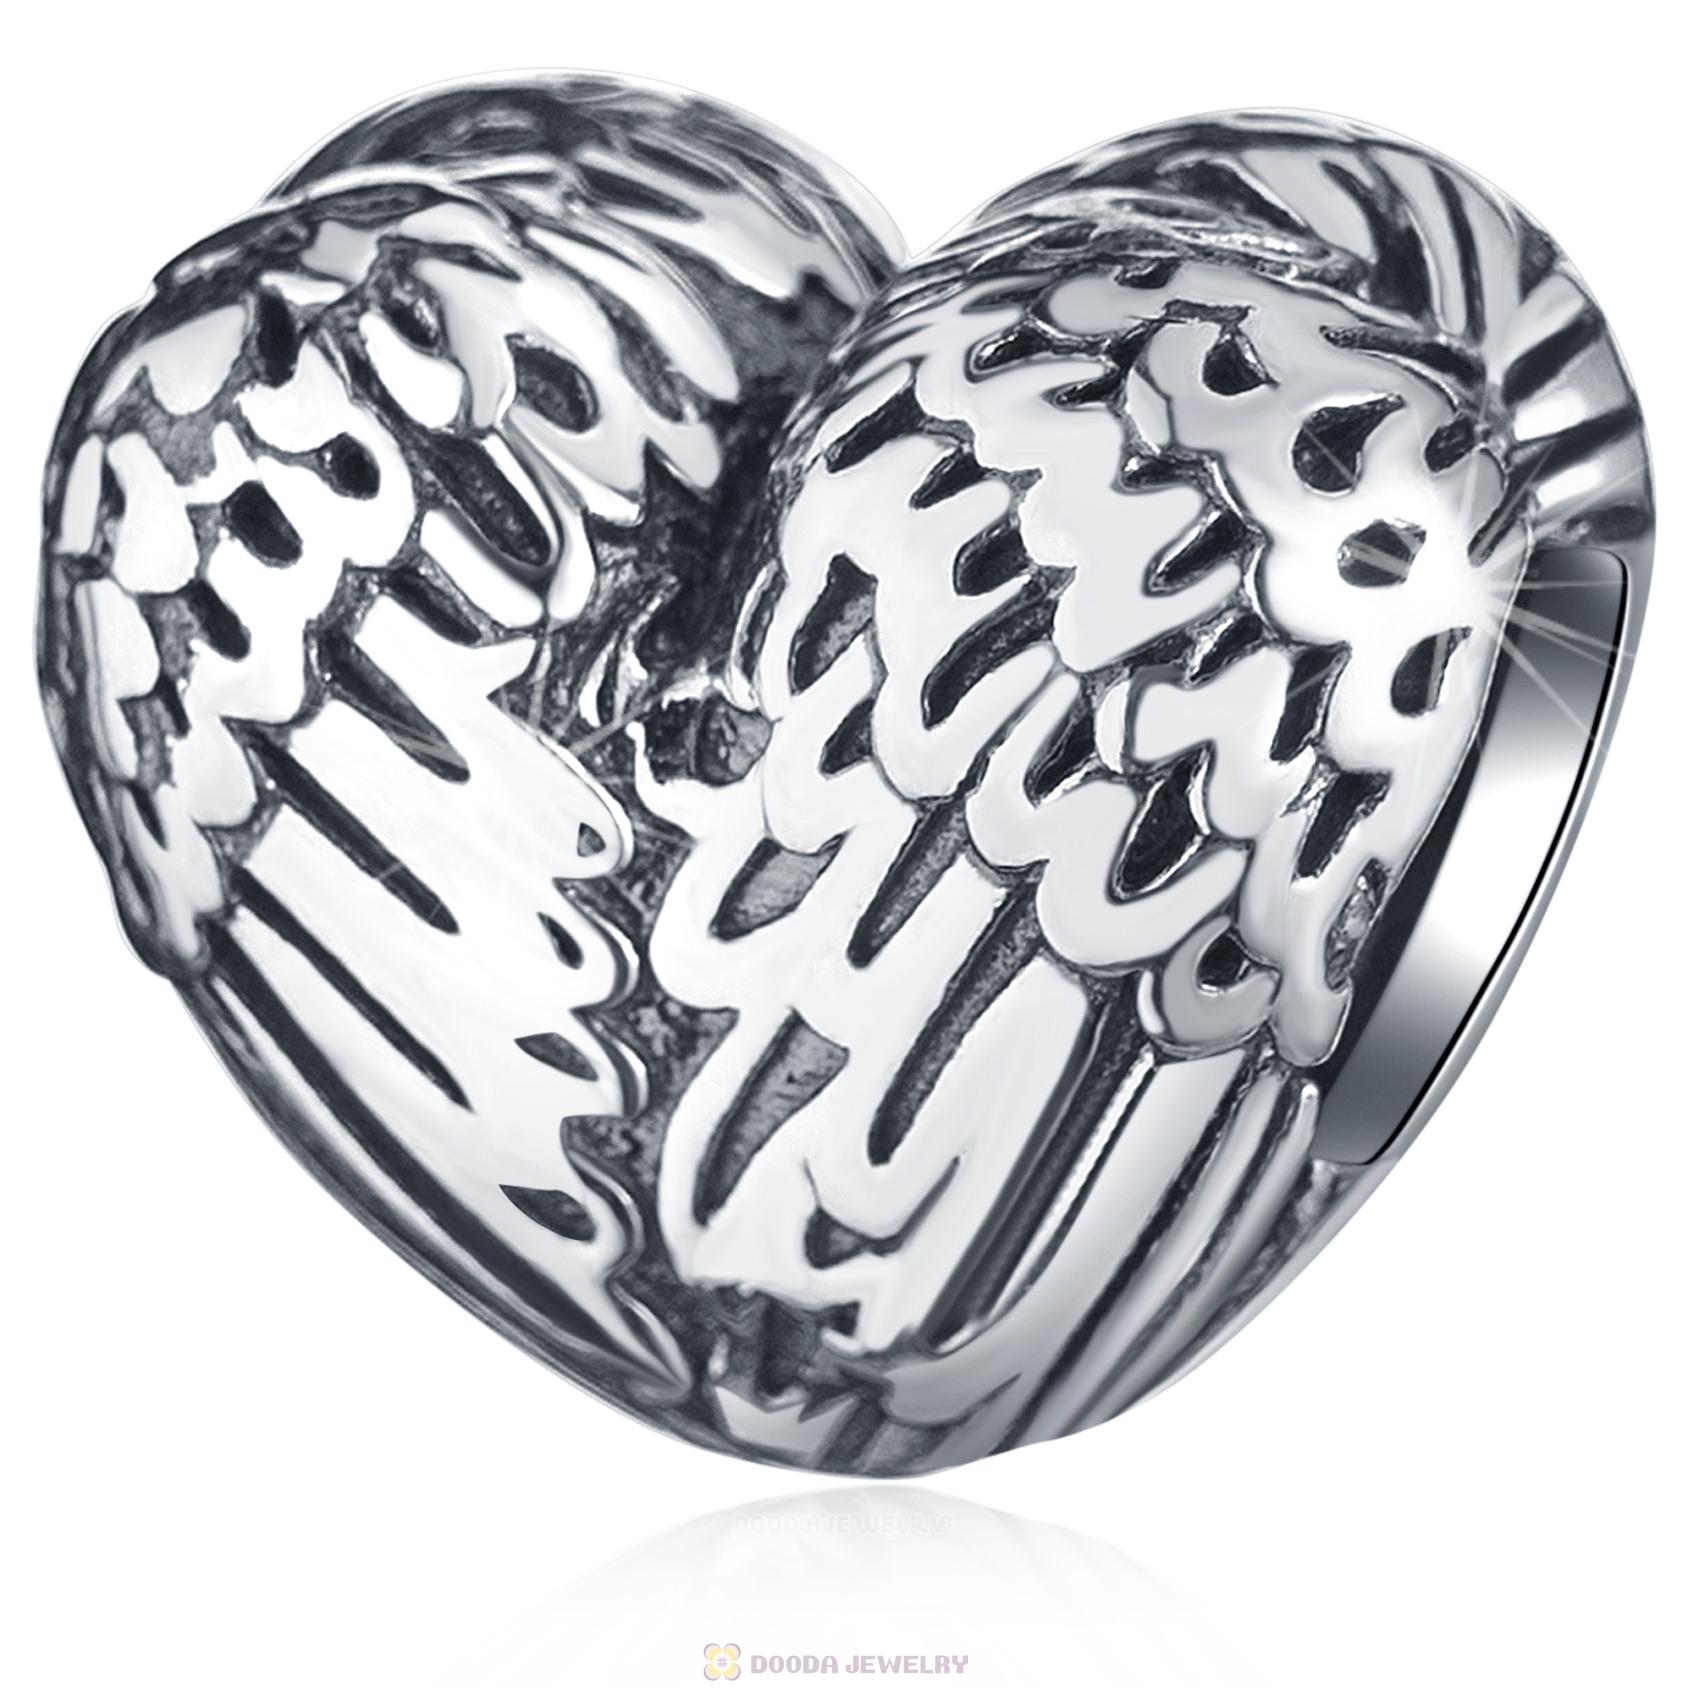 Antique 925 Sterling Silver Angelic Feathers Heart Charm Bead